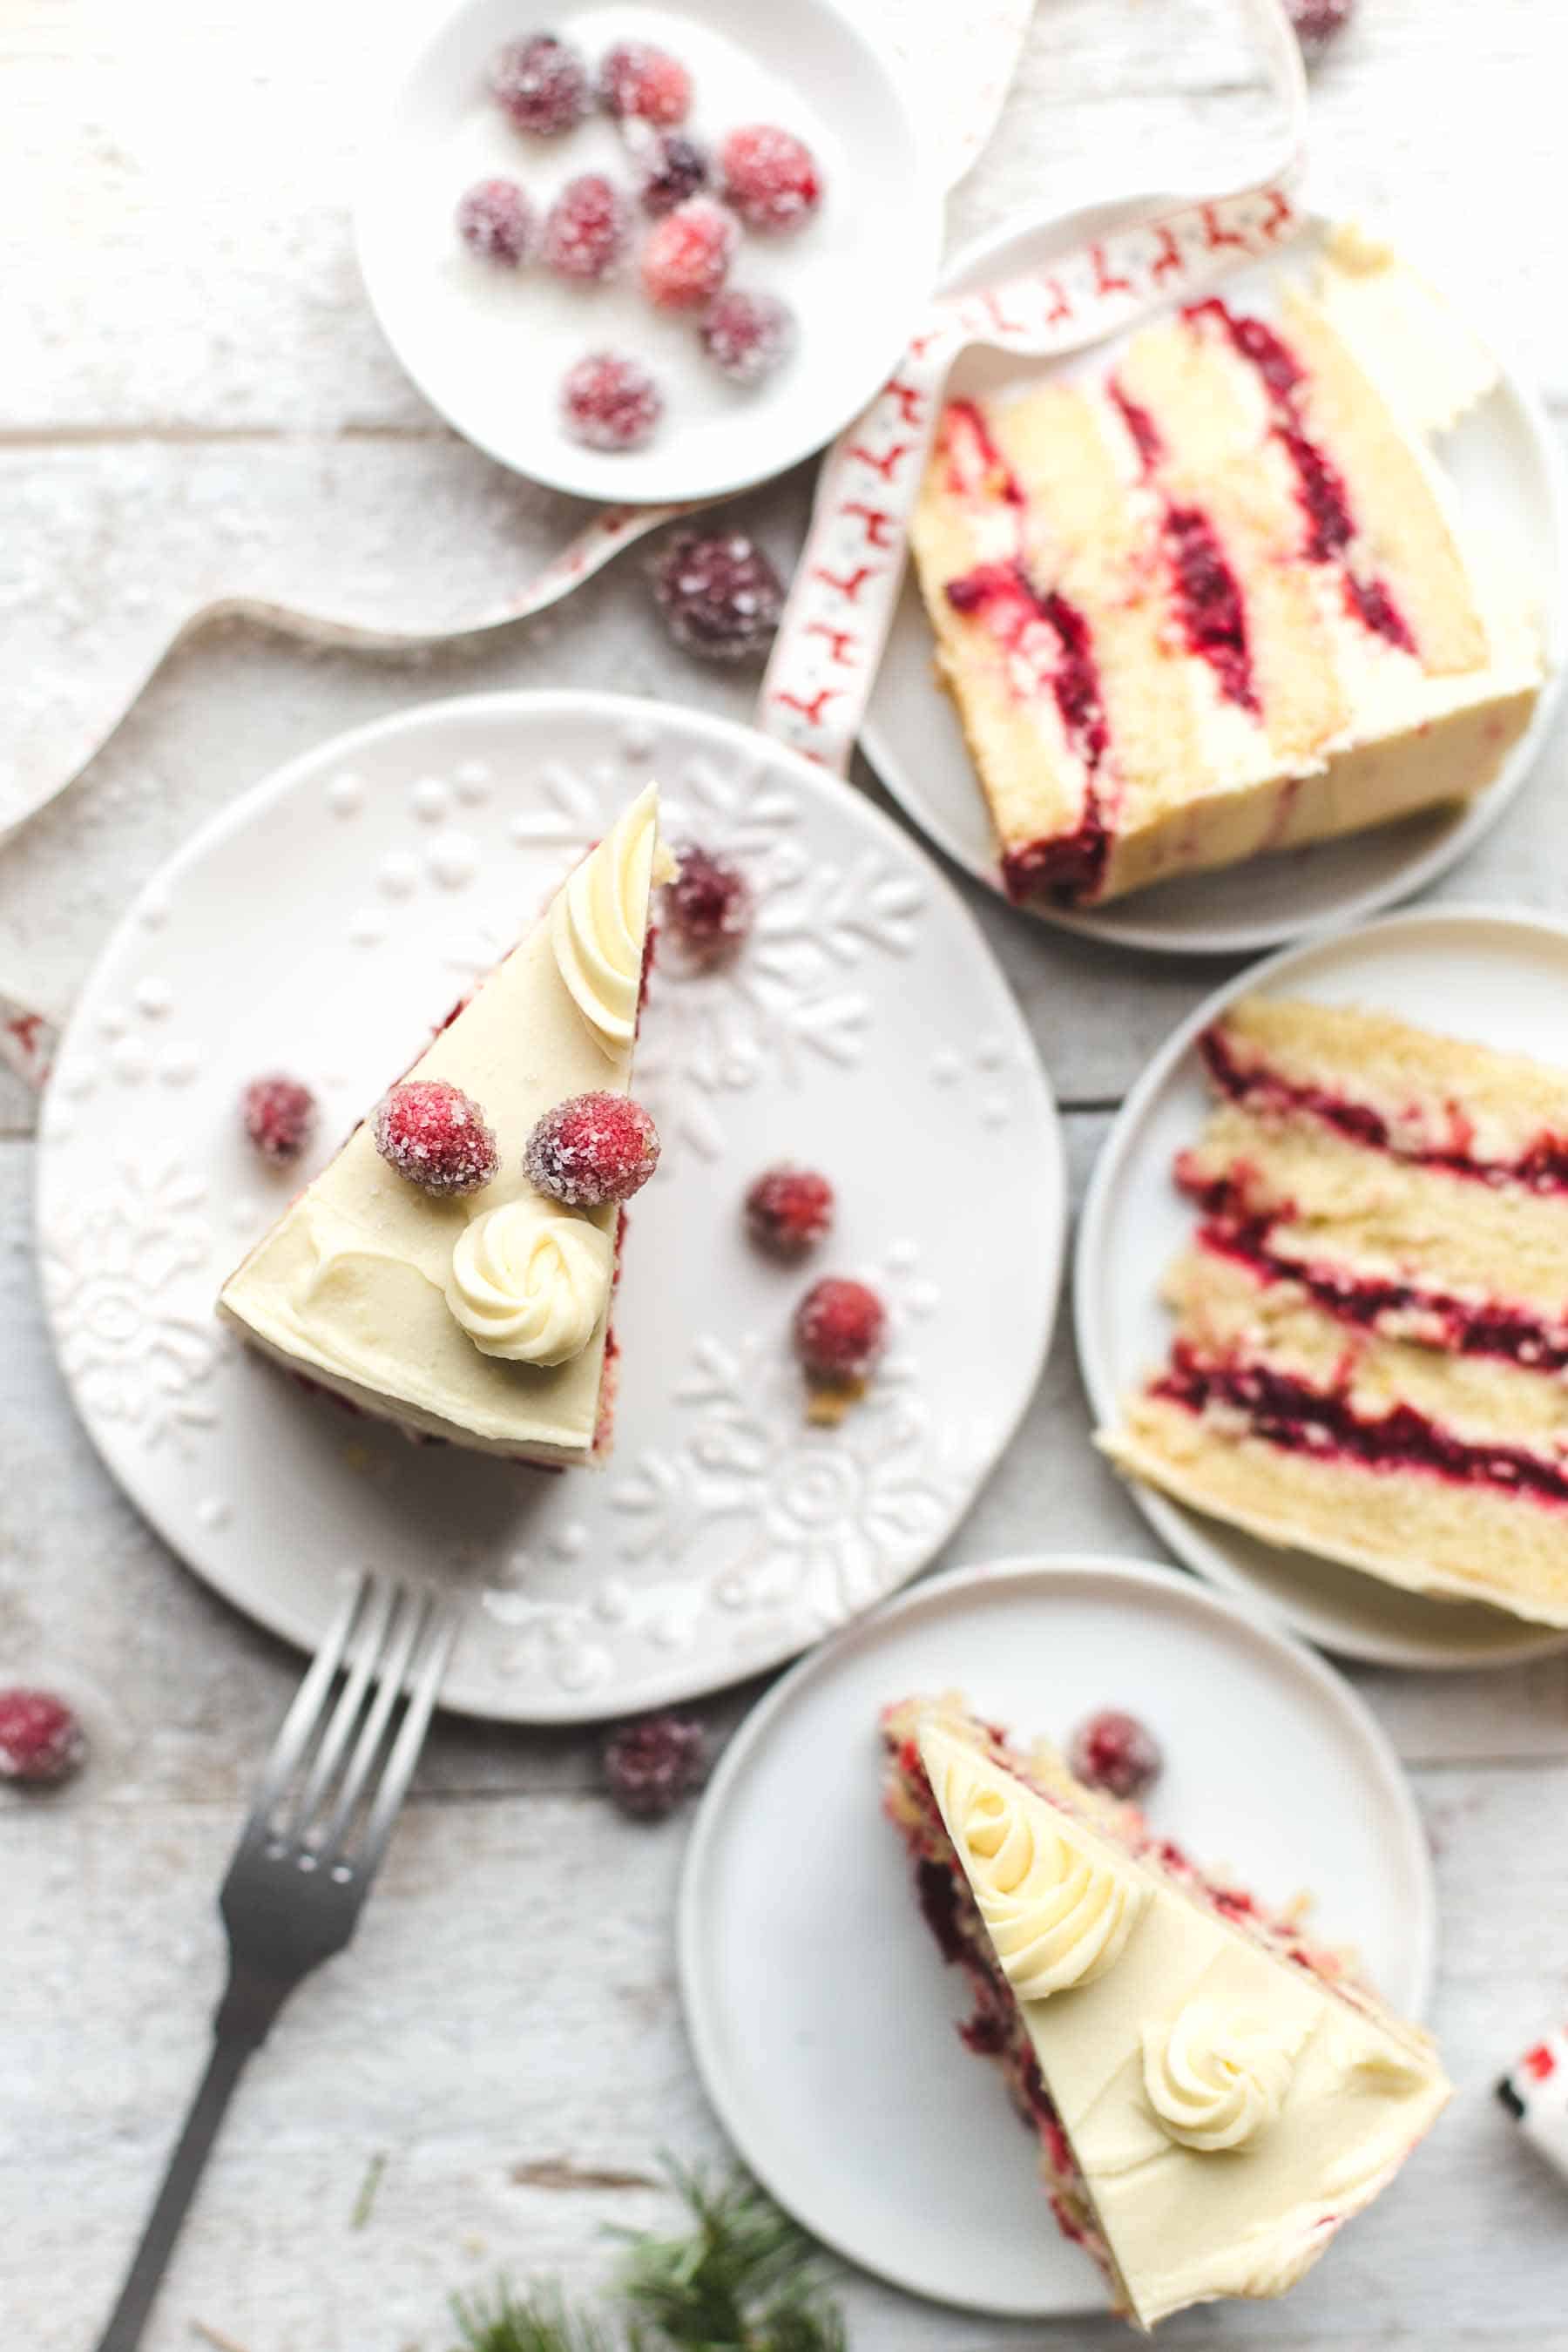 slices of orange layer cake filled with cranberries on white dessert plates